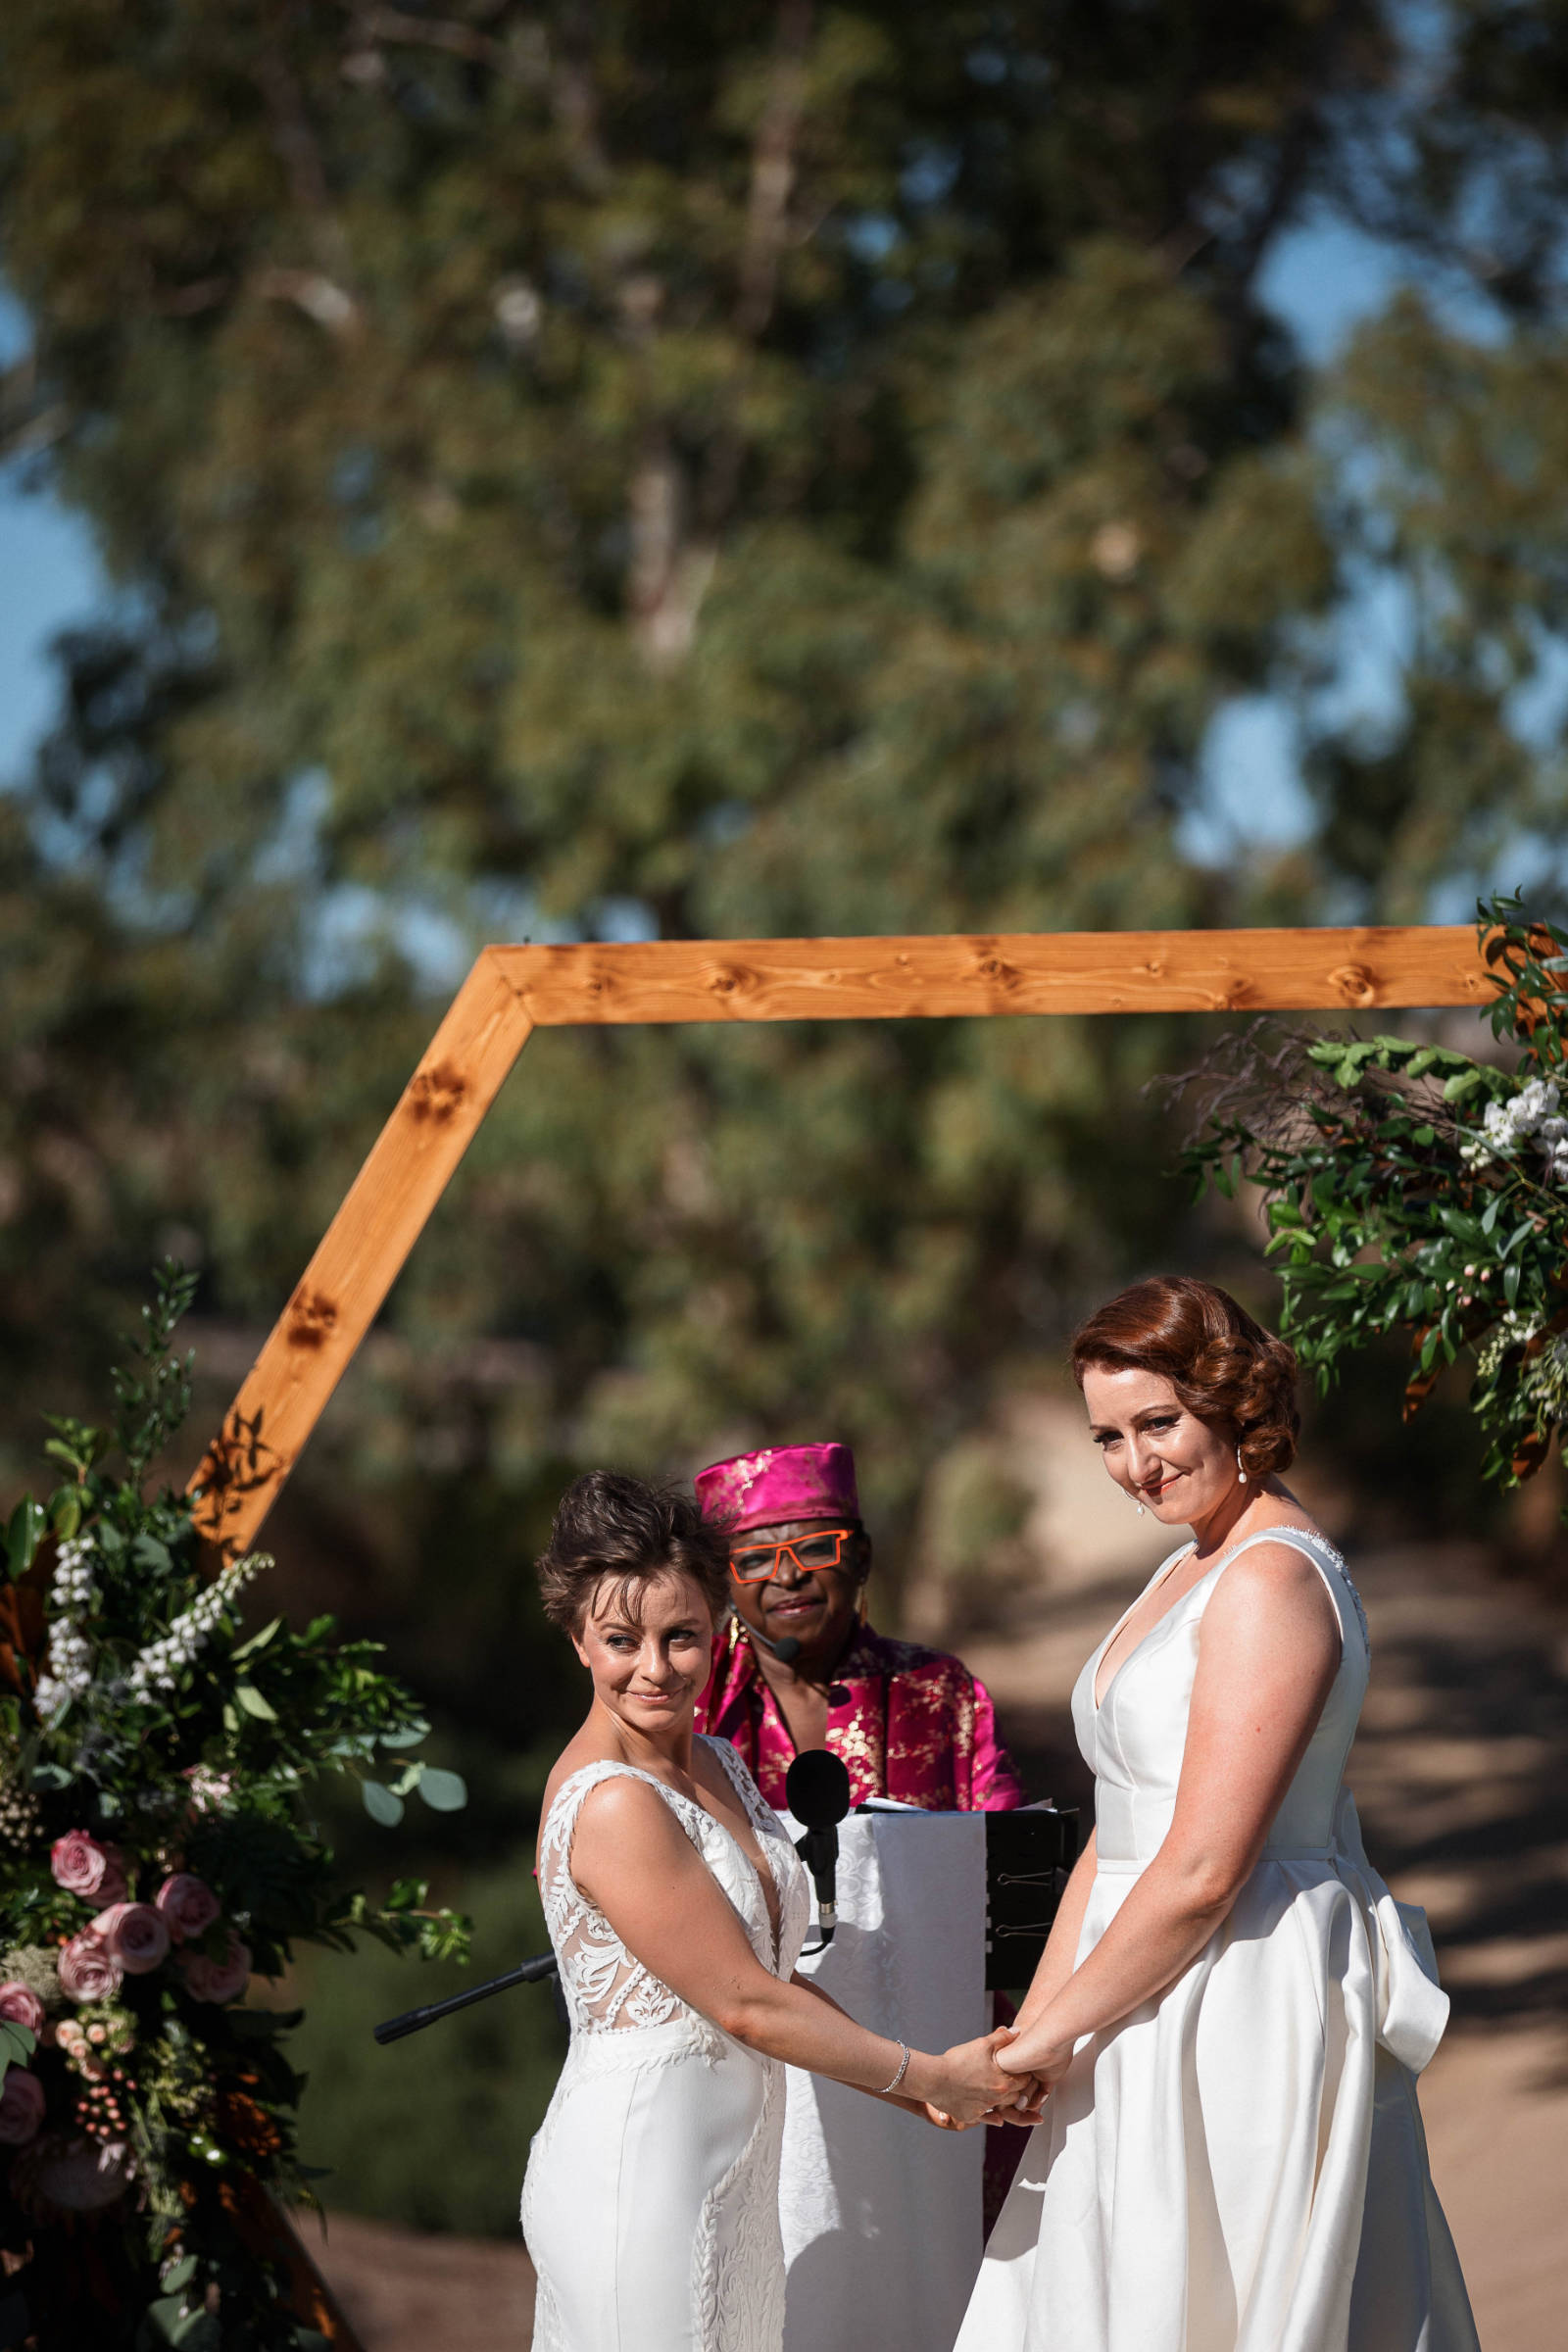 Luxury Barossa Valley wedding for Firlie and Raegan at The Kingsford Barossa. Photos by James Field Photography.